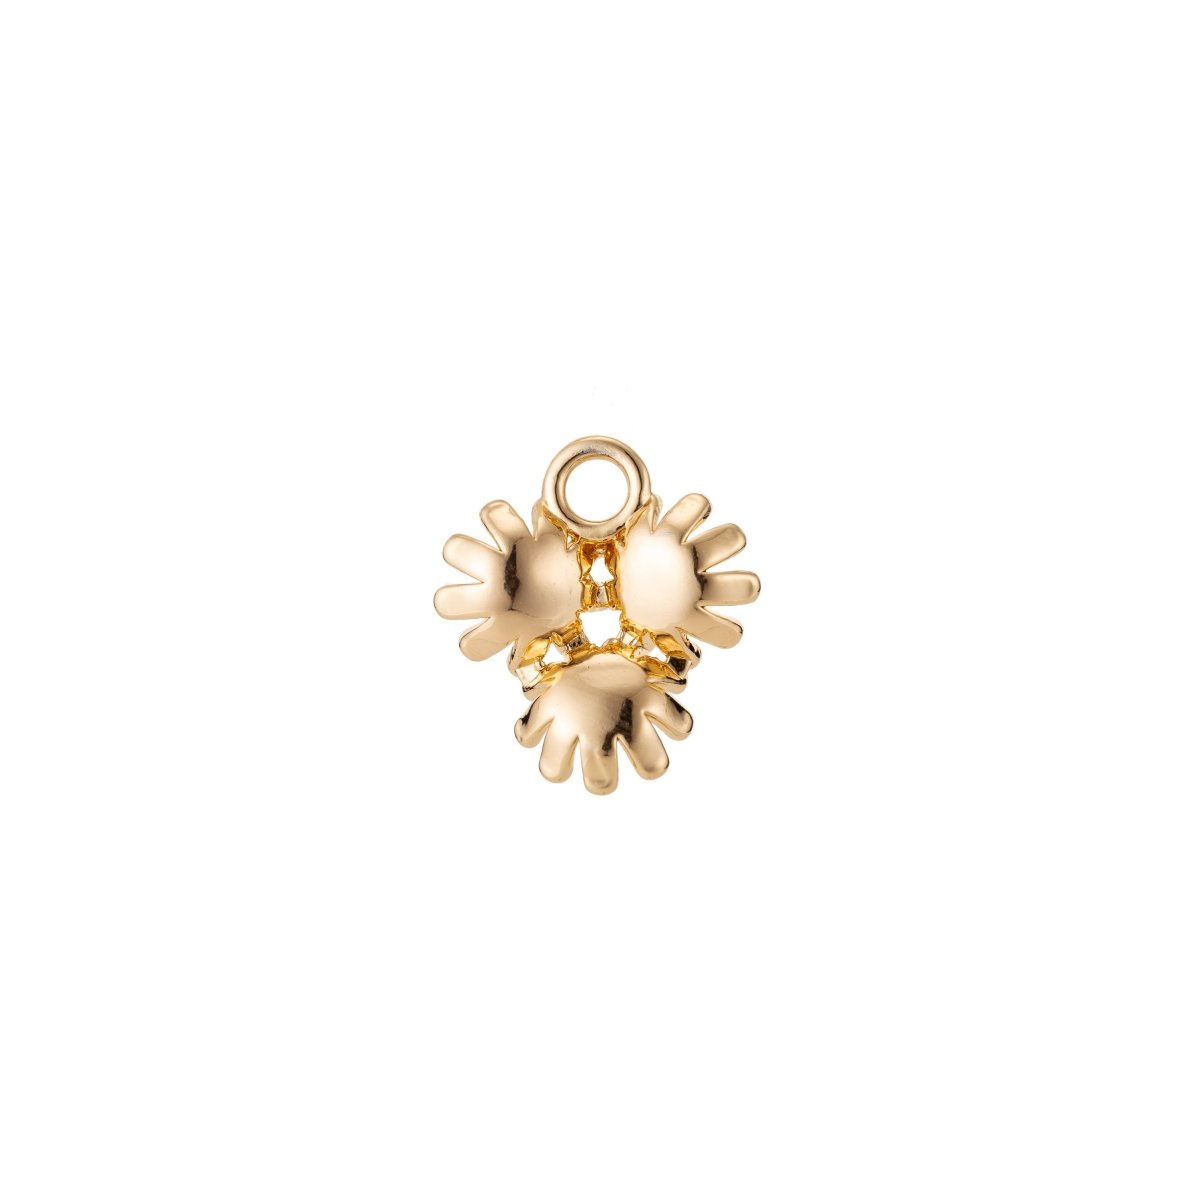 Dainty 18k Gold Filled Flower Charm Tiny Floral Charm Bracelet Necklace Earring Making - DLUXCA